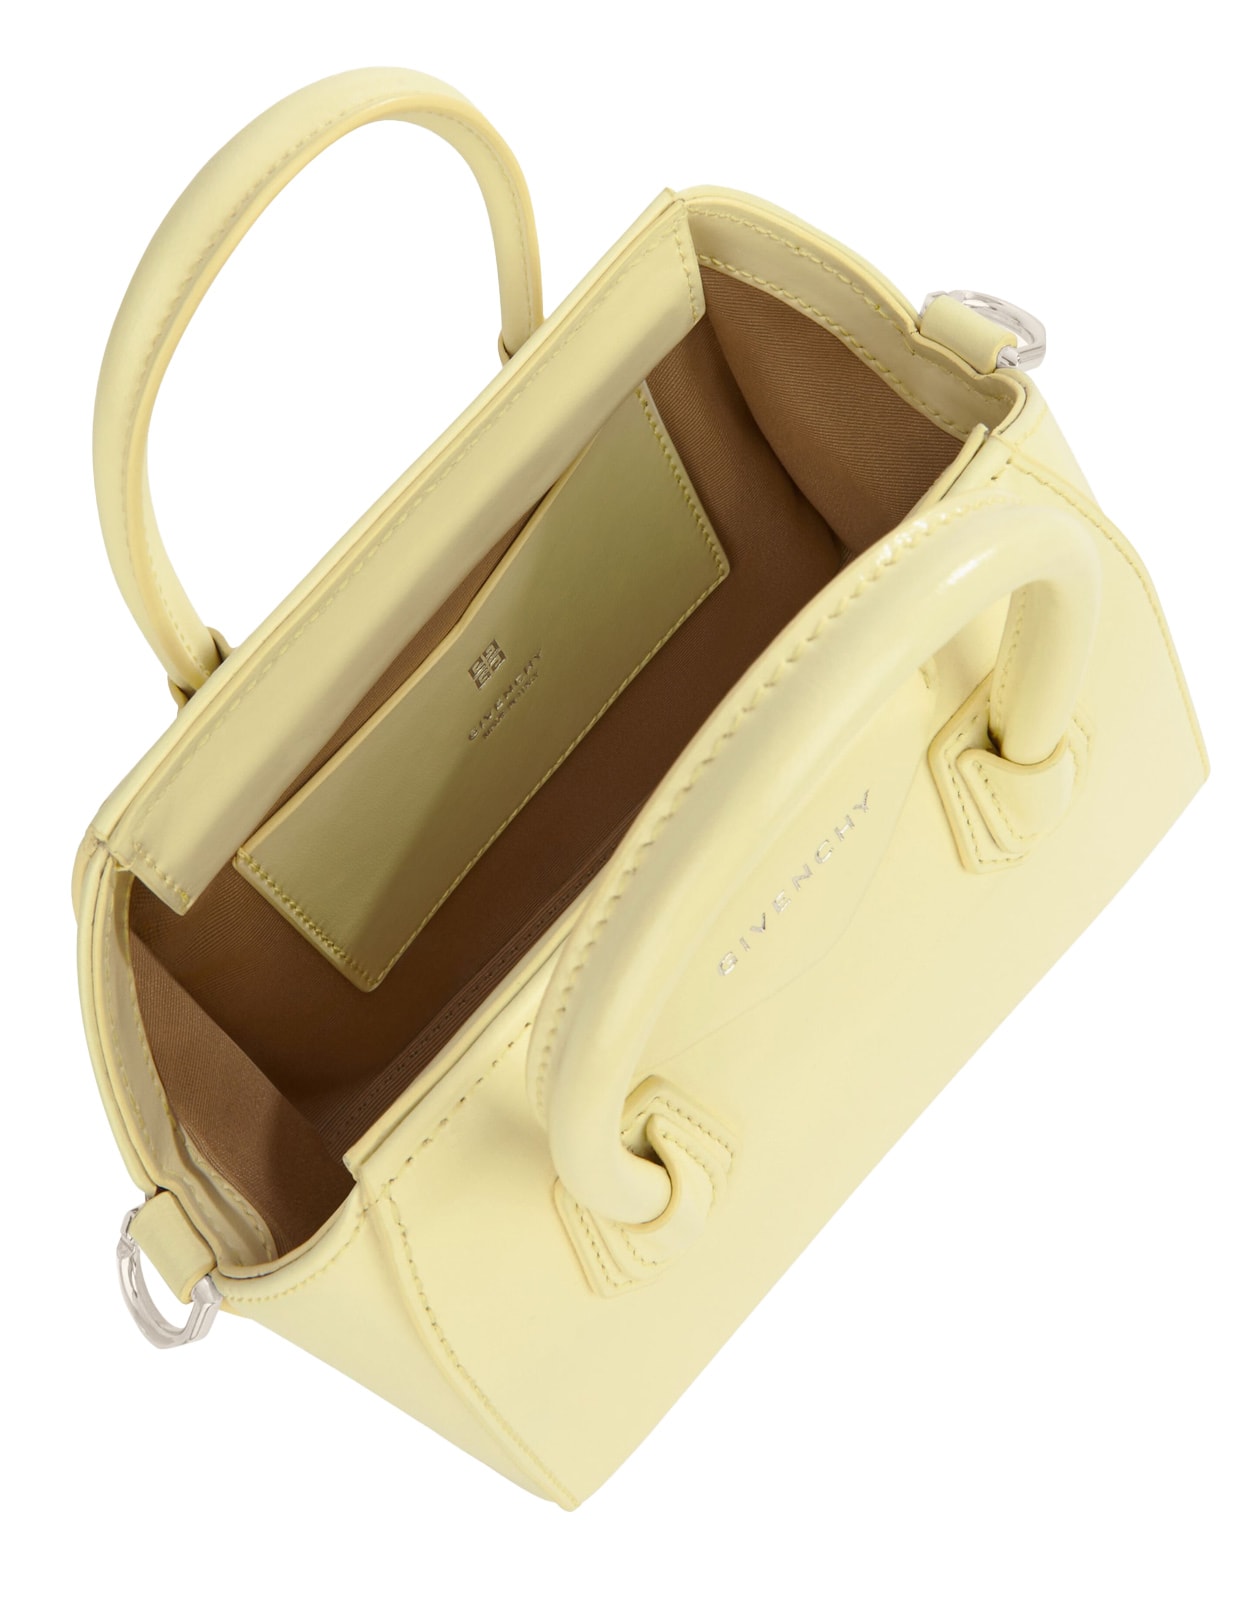 Shop Givenchy Antigona Toy Bag In Soft Yellow And Natural Beige Box Leather